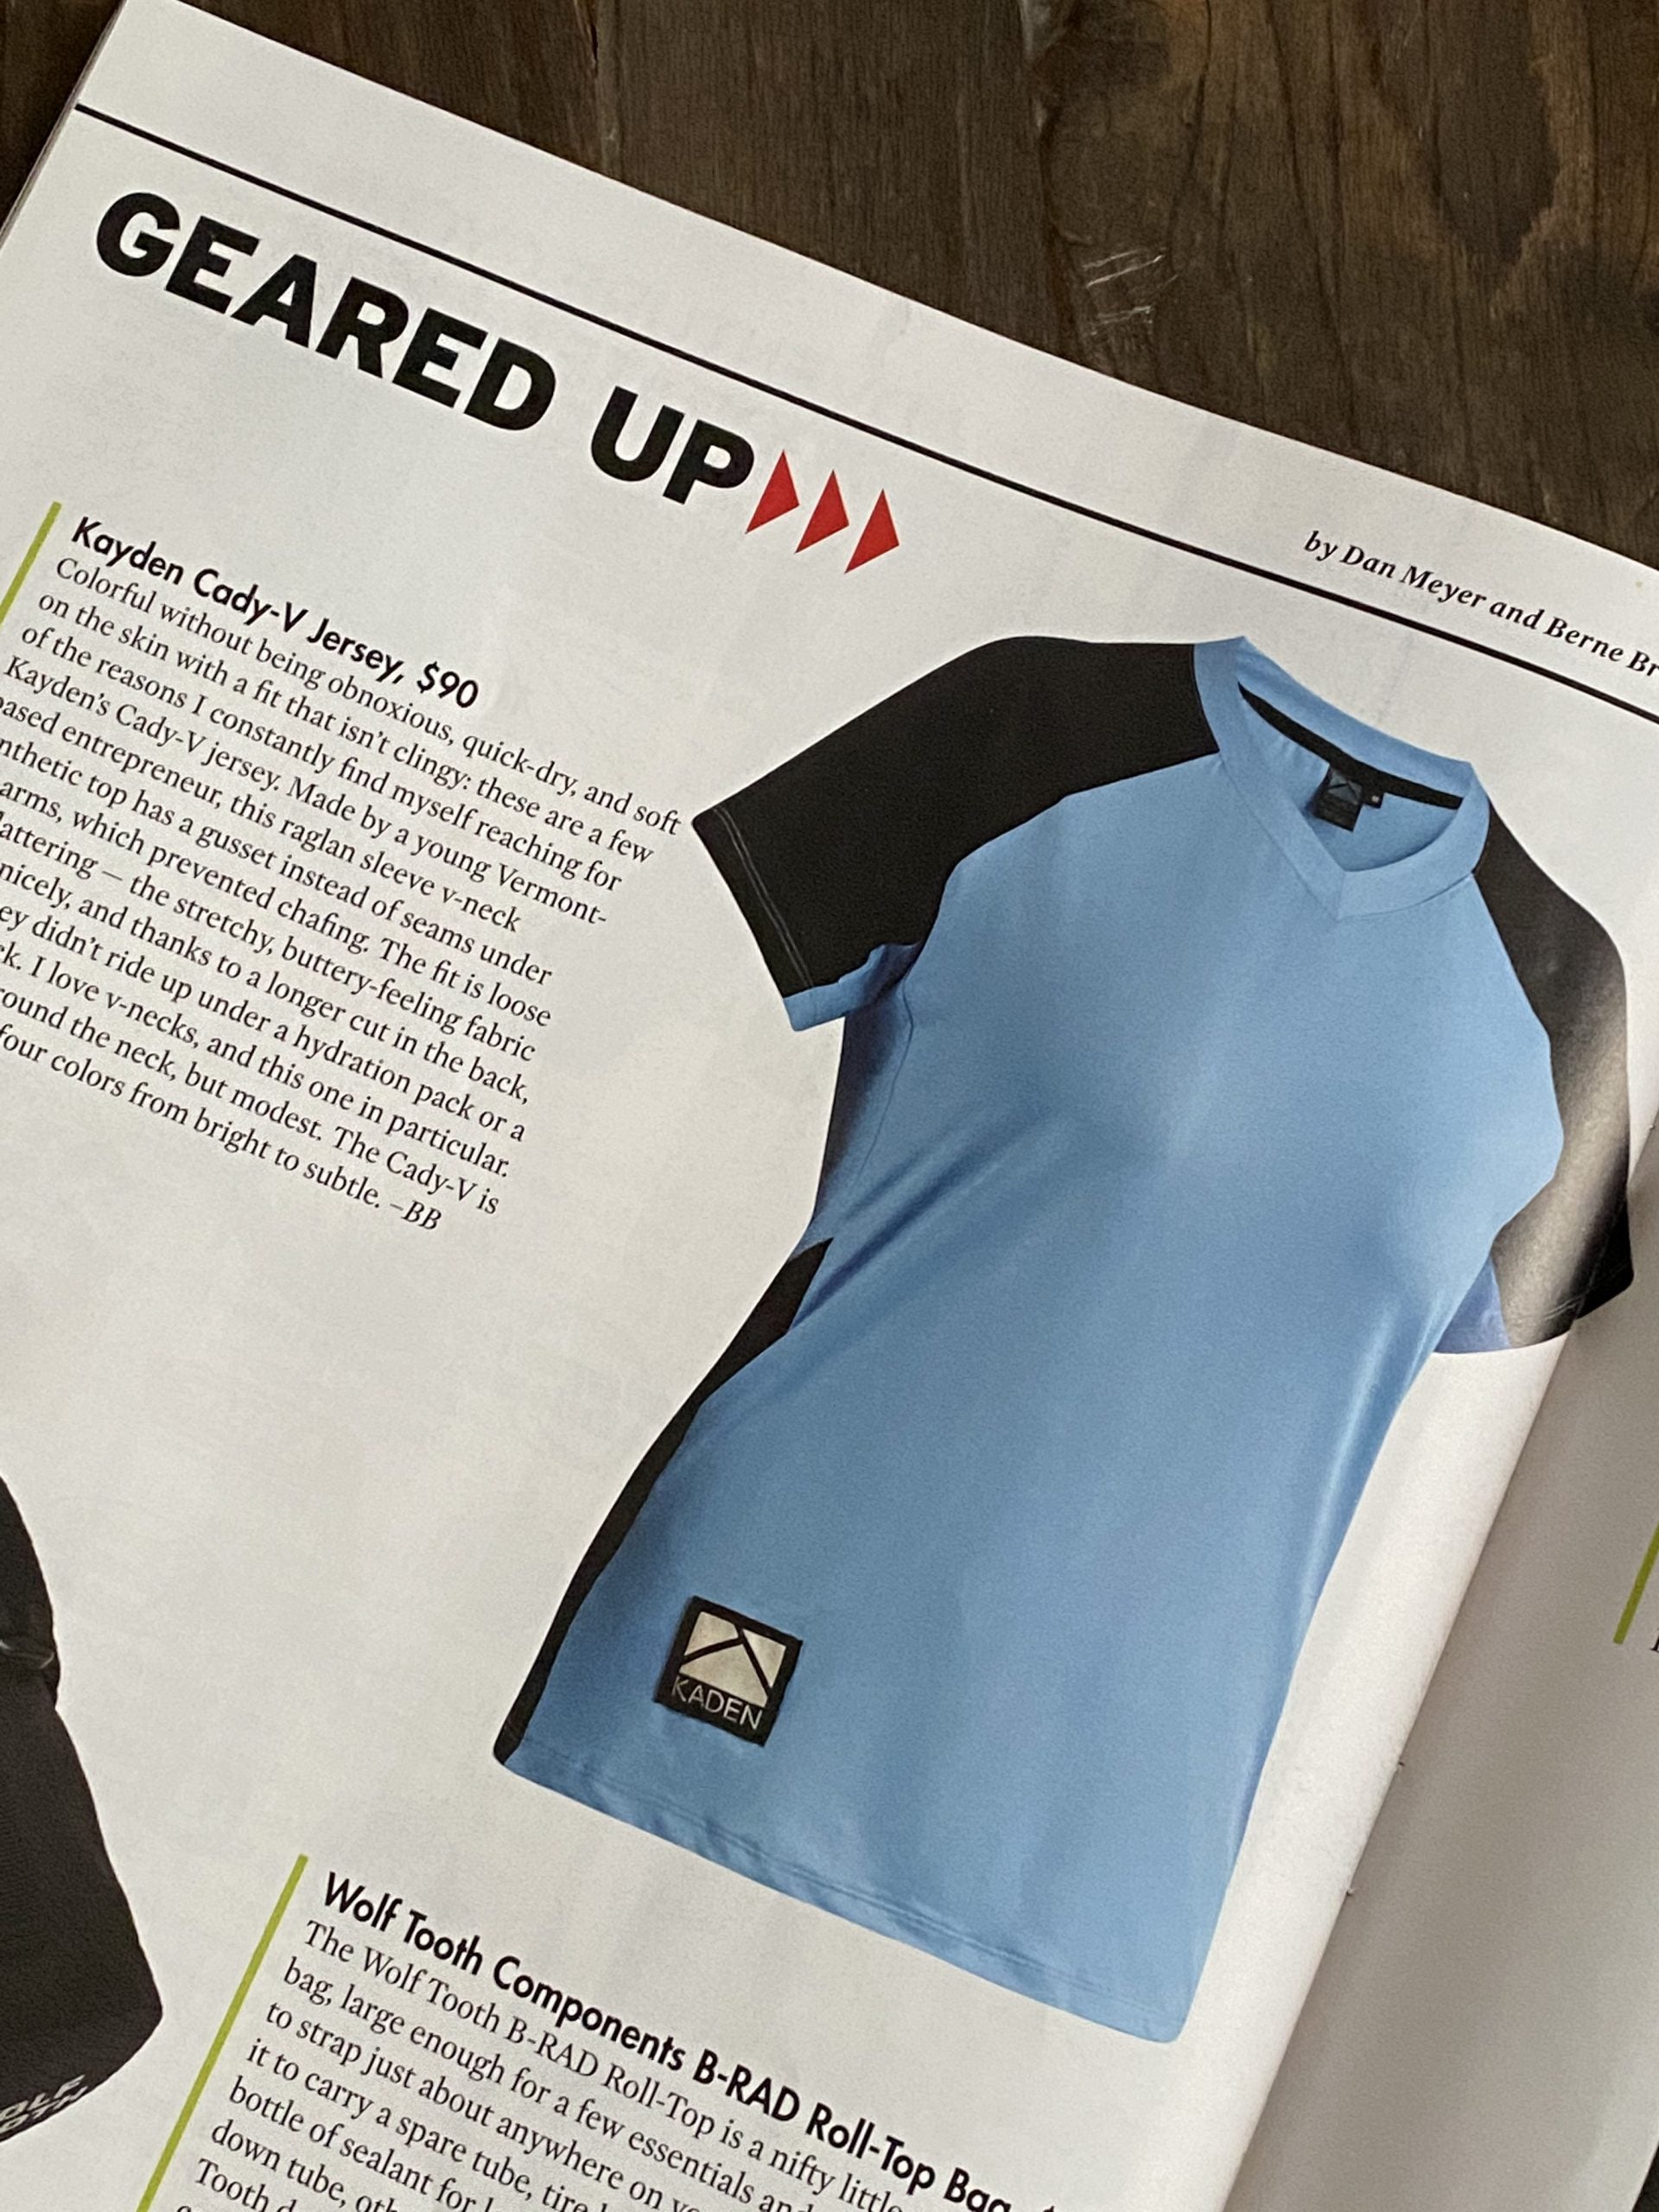 Cady-V Jersey Review in Adventure Cyclist Magazine - Publication Photo